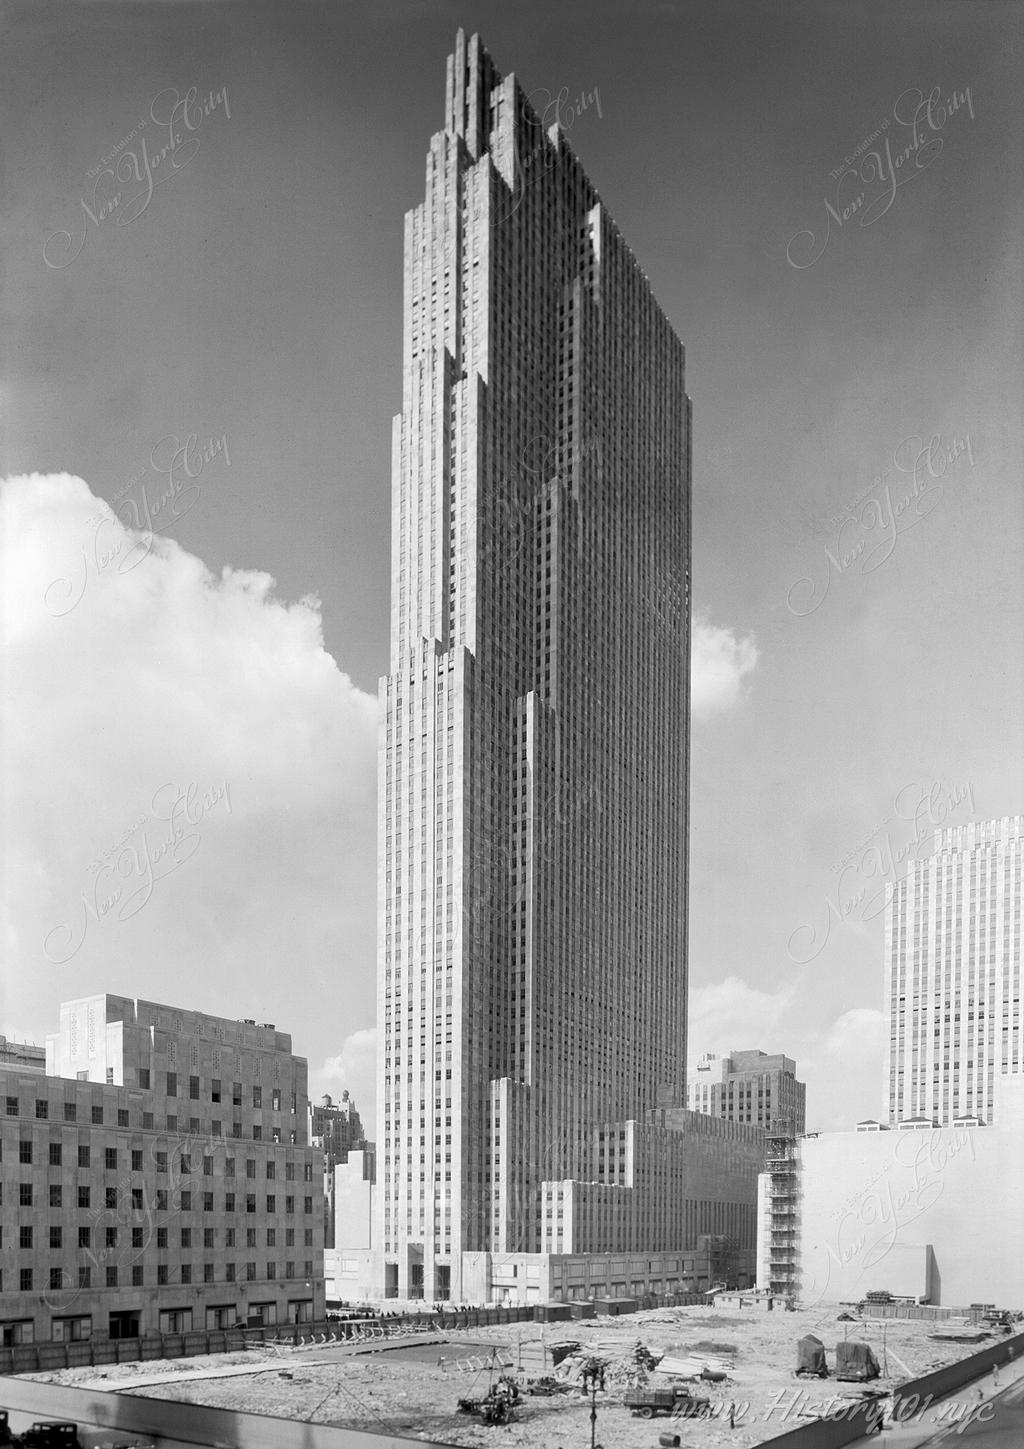 Photograph of the RCA Building at Rockefeller Center, as viewed from old Union Club.